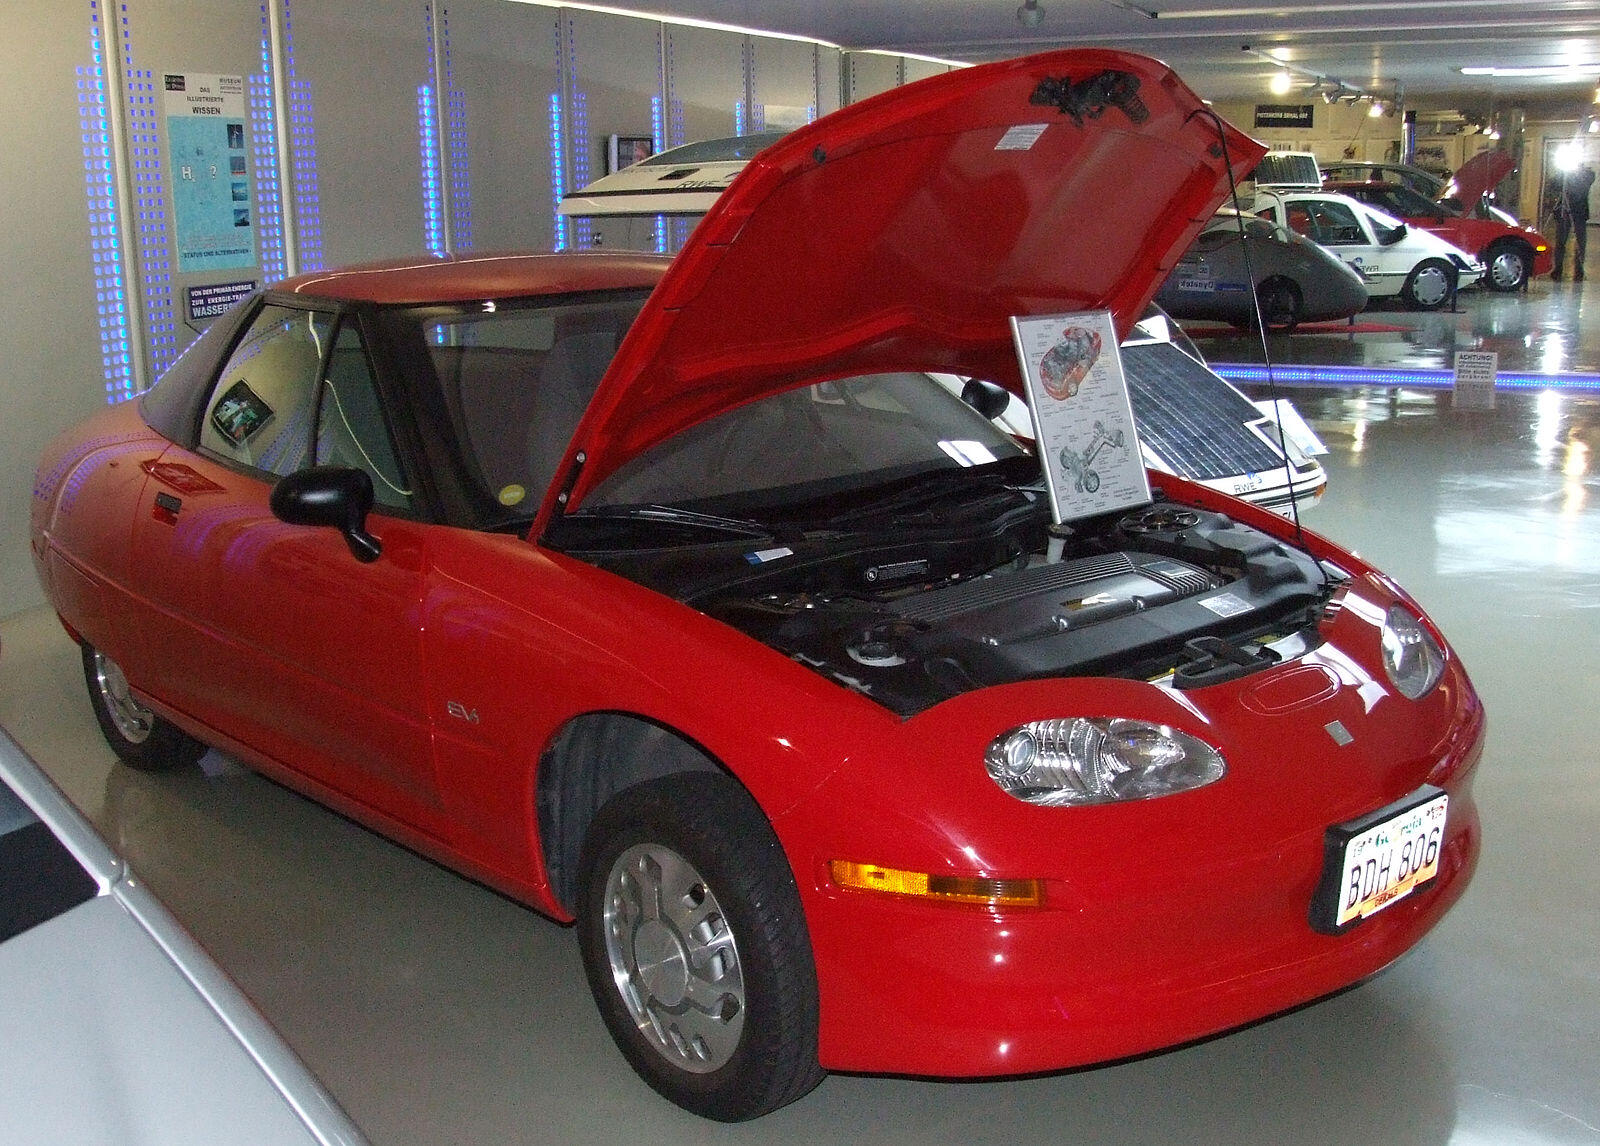 The EV1, the first modern electric car, displayed in a car museum showroom.